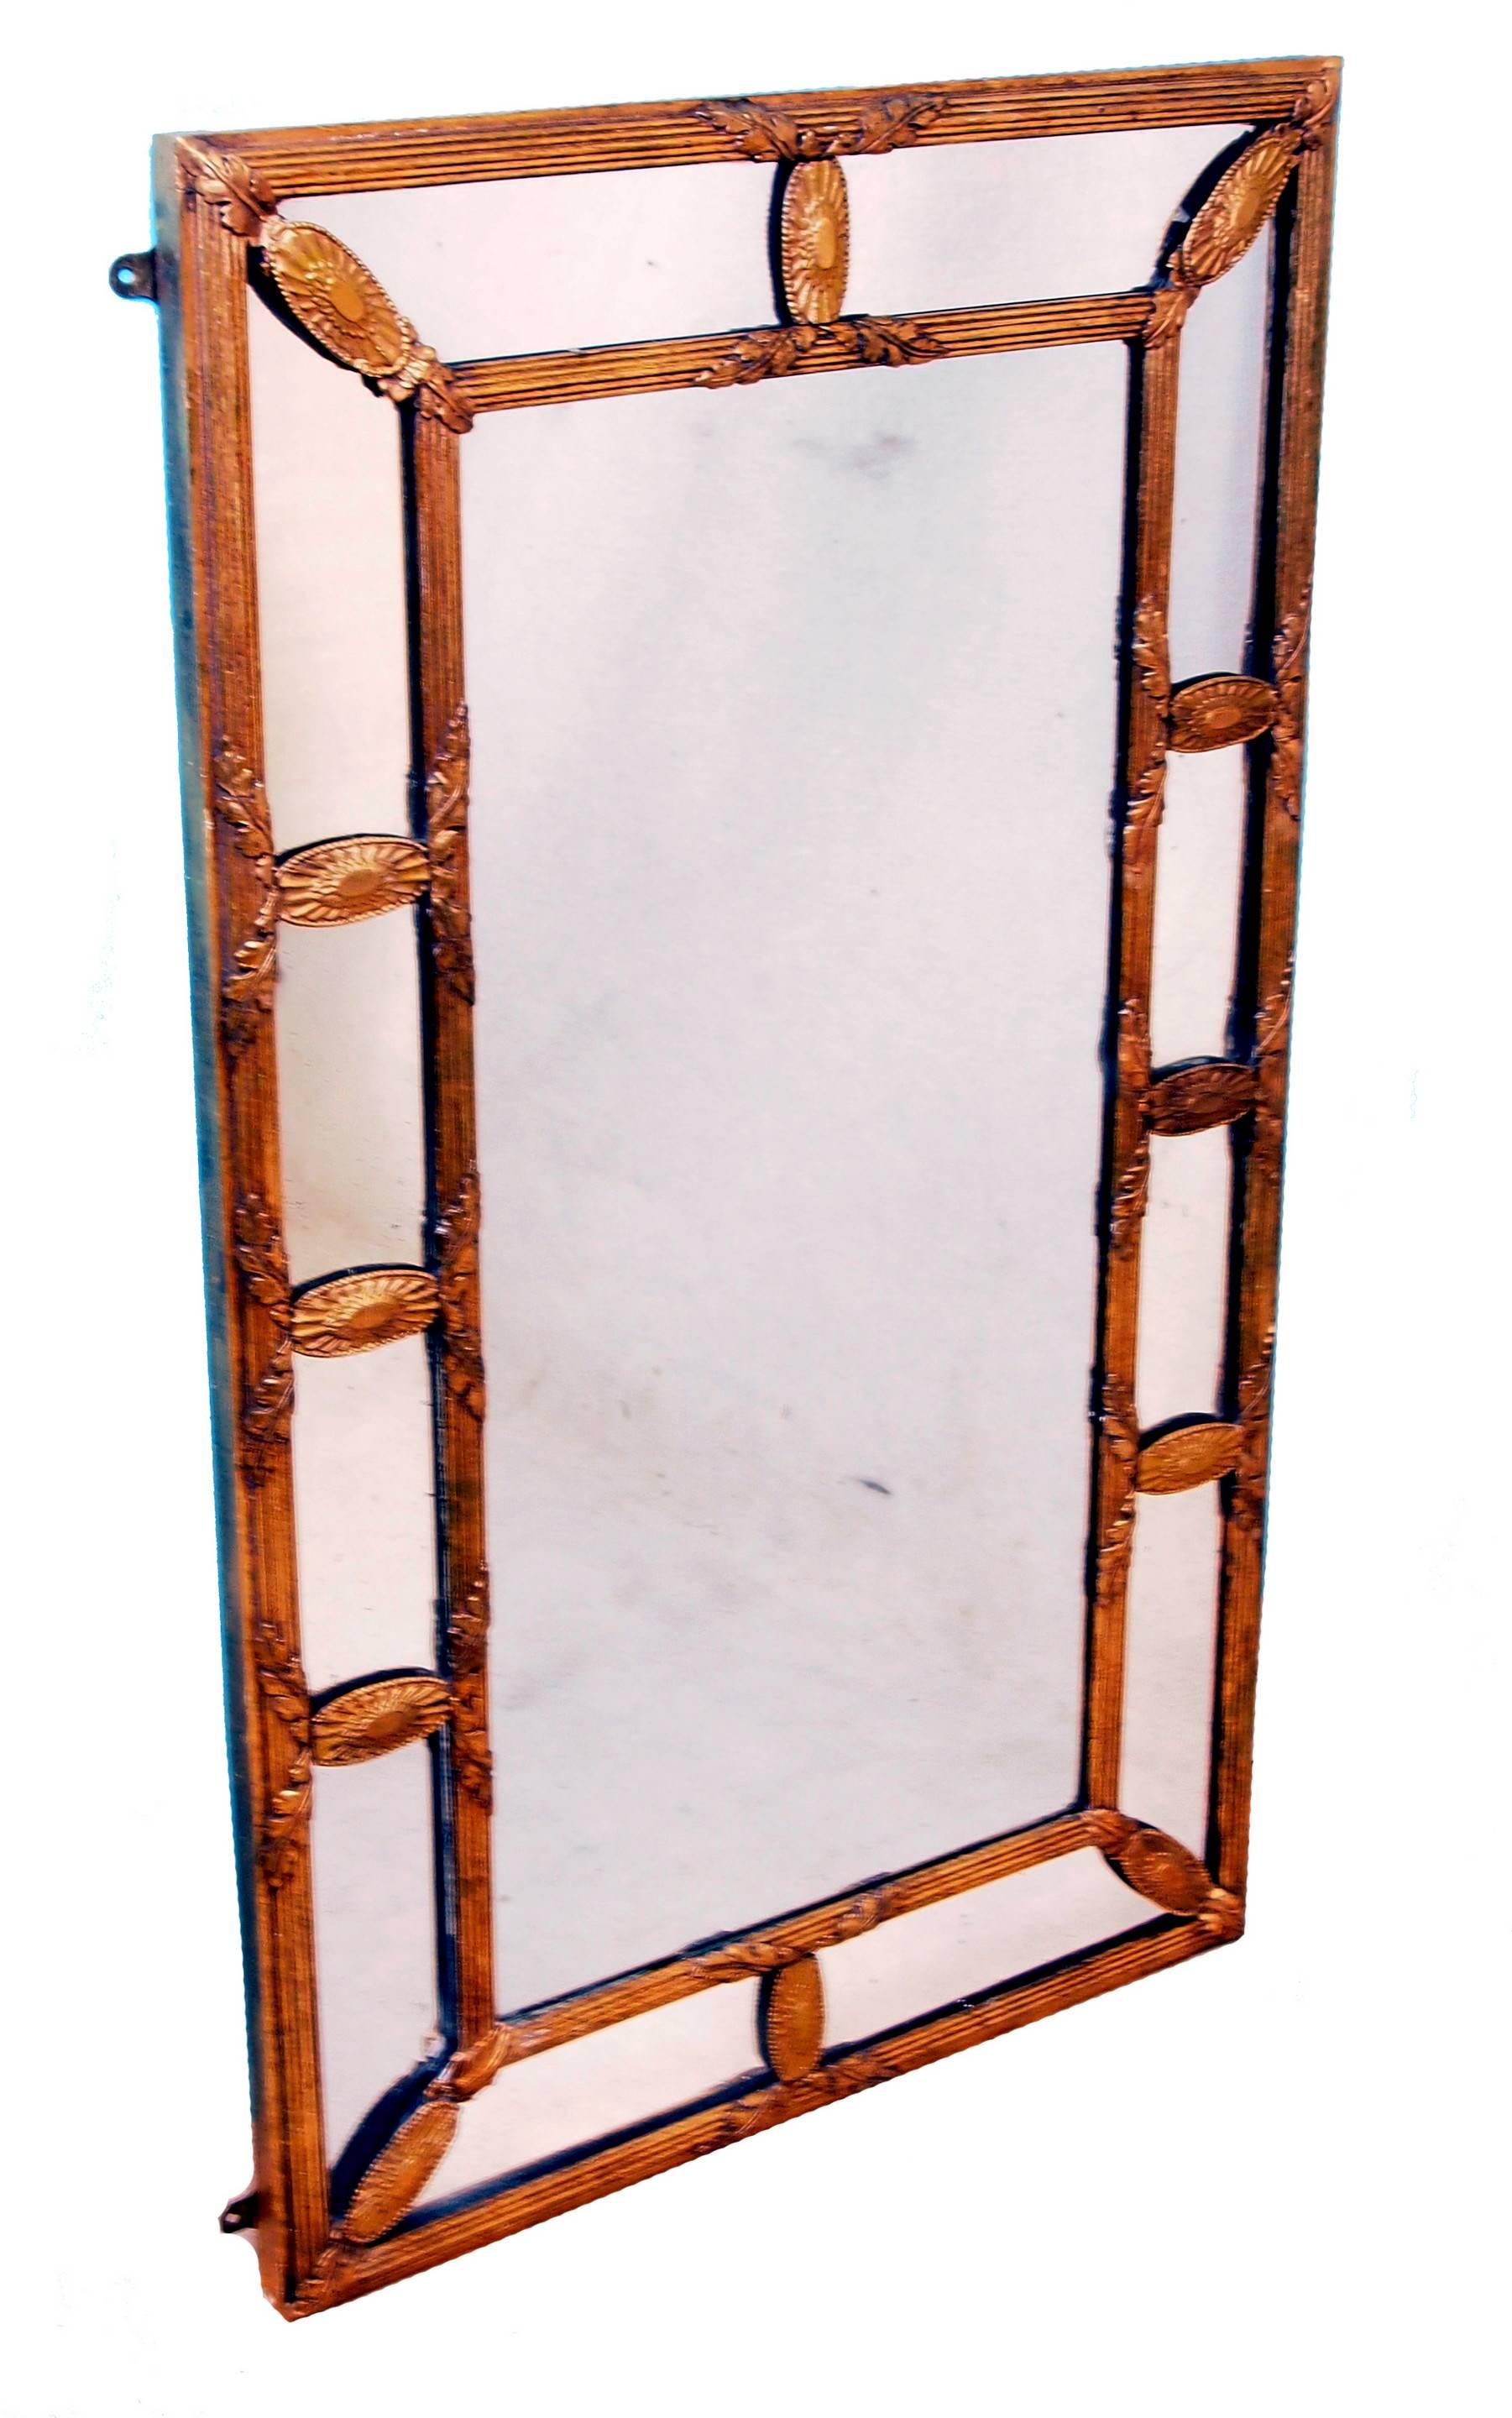 A very attractive early 20th century rectangular gilt overmantel mirror of section design having well carved and moulded decoration to frame.